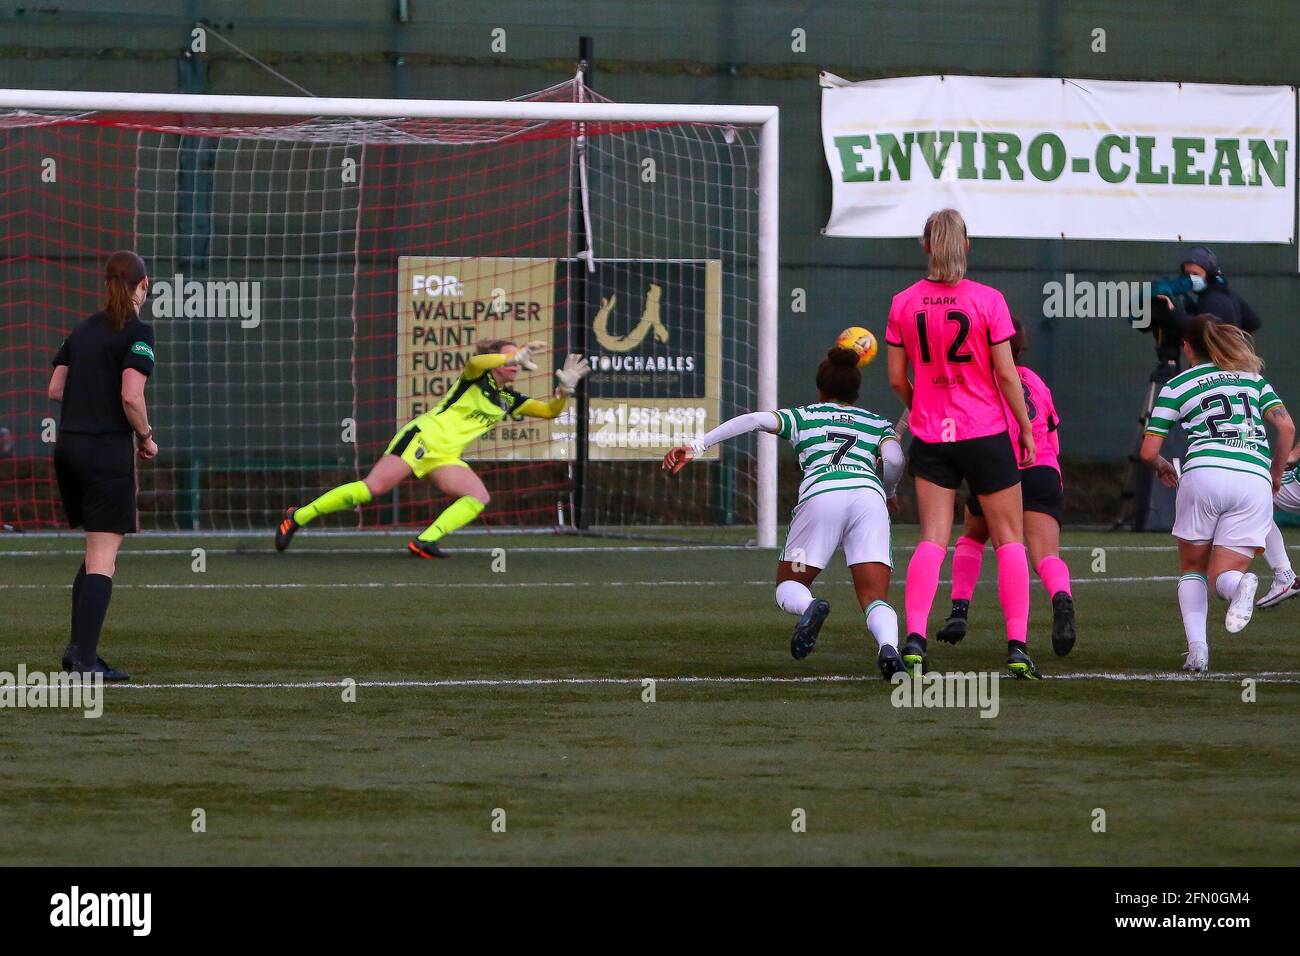 East Kilbride, UK. 12th May, 2021. PENALTY! - Erin Clachers (#25) of Glasgow City FC saves low to her left to keep the scores level during the Scottish Building Society Scottish Women's Premier League 1 Fixture Celtic FC Vs Glasgow City, K-Park Training Academy, East Kilbride, Glasgow, 12/05/2021 | Credit: Colin Poultney/Alamy Live News Stock Photo